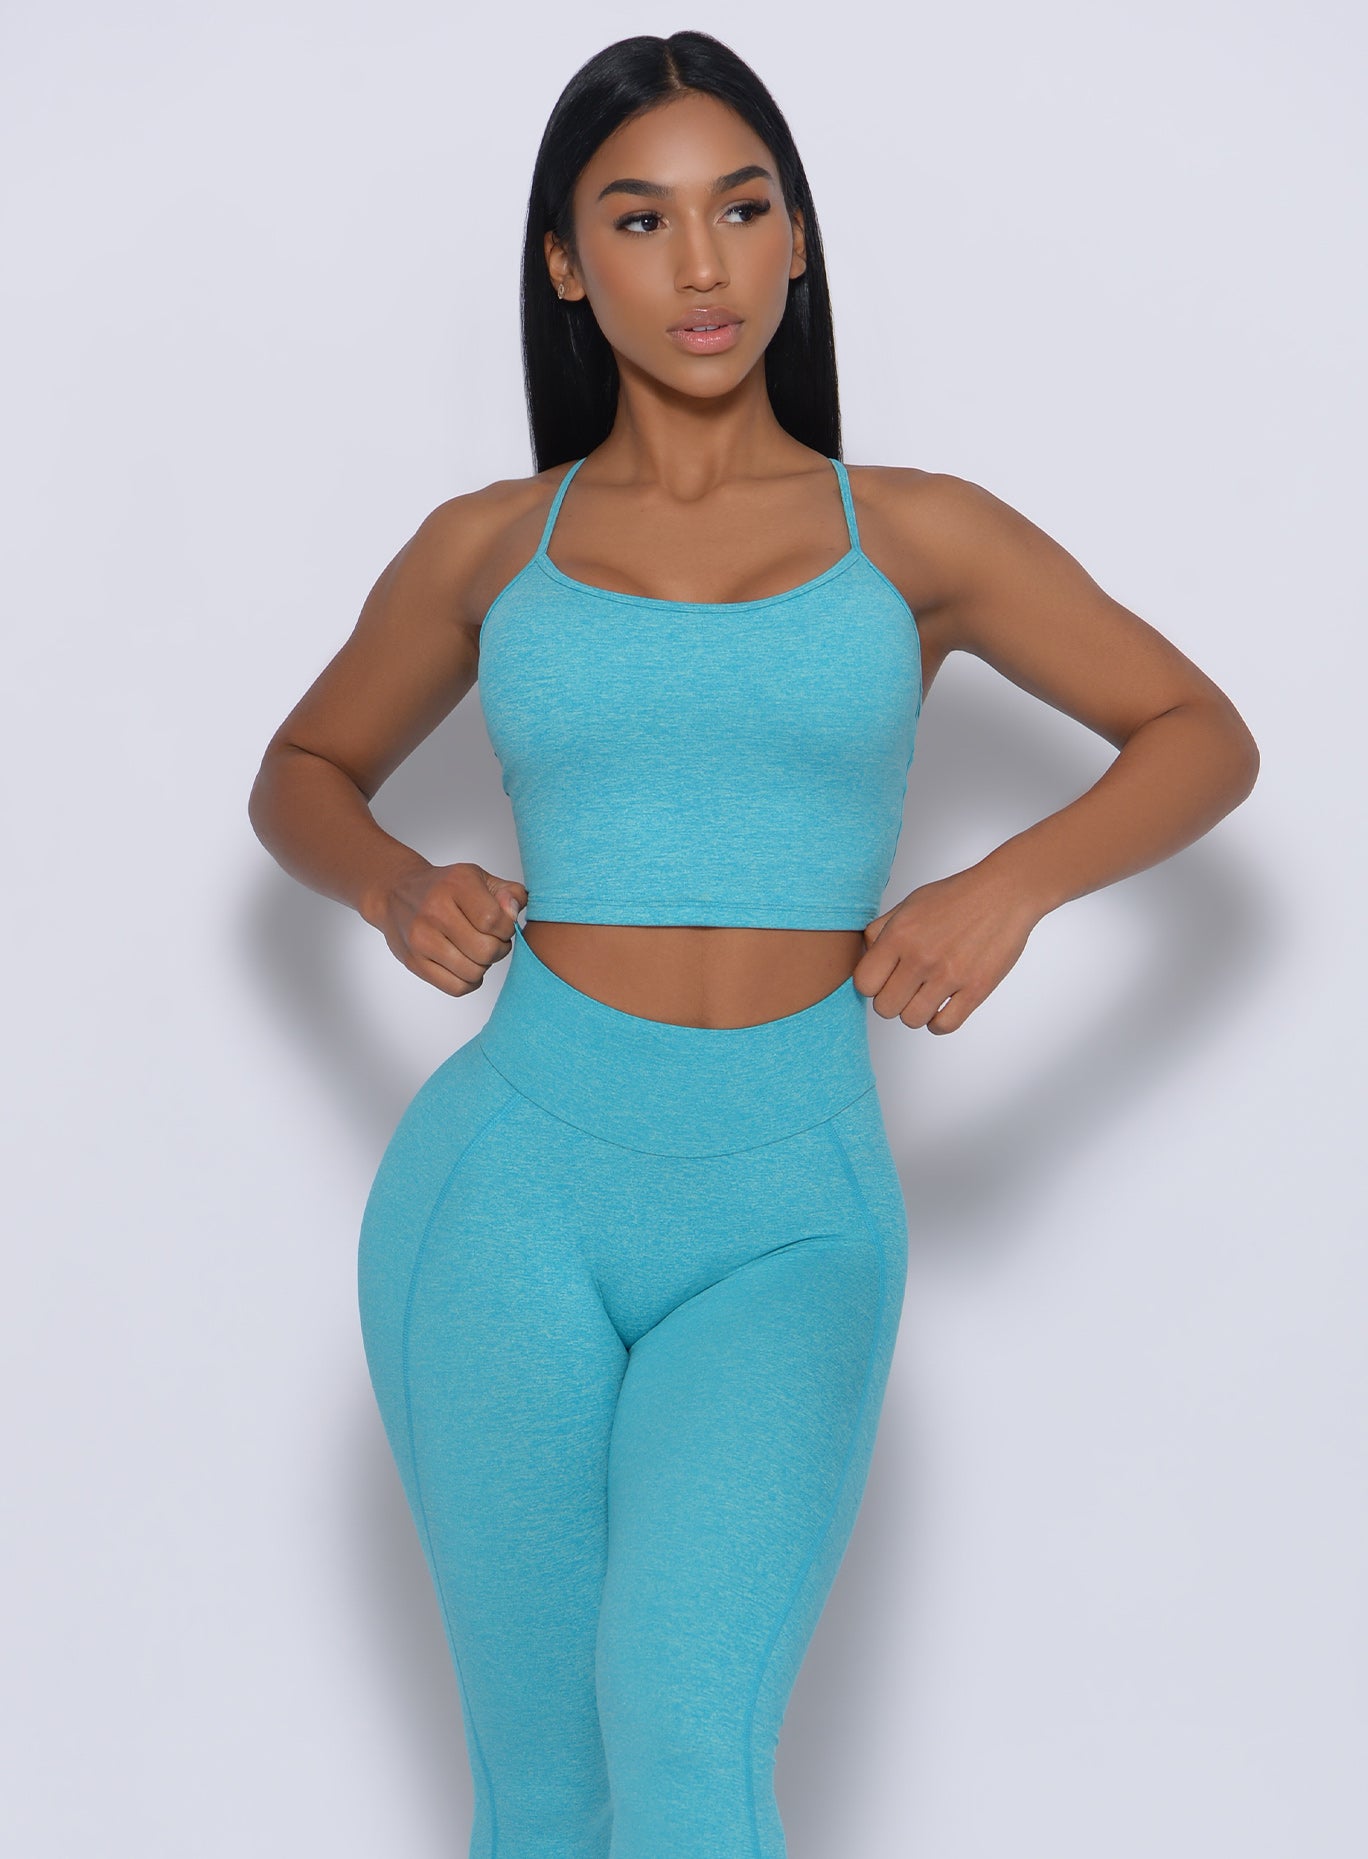 Model facing forward wearing our relax sports bra in crystal blue color and a matching leggings